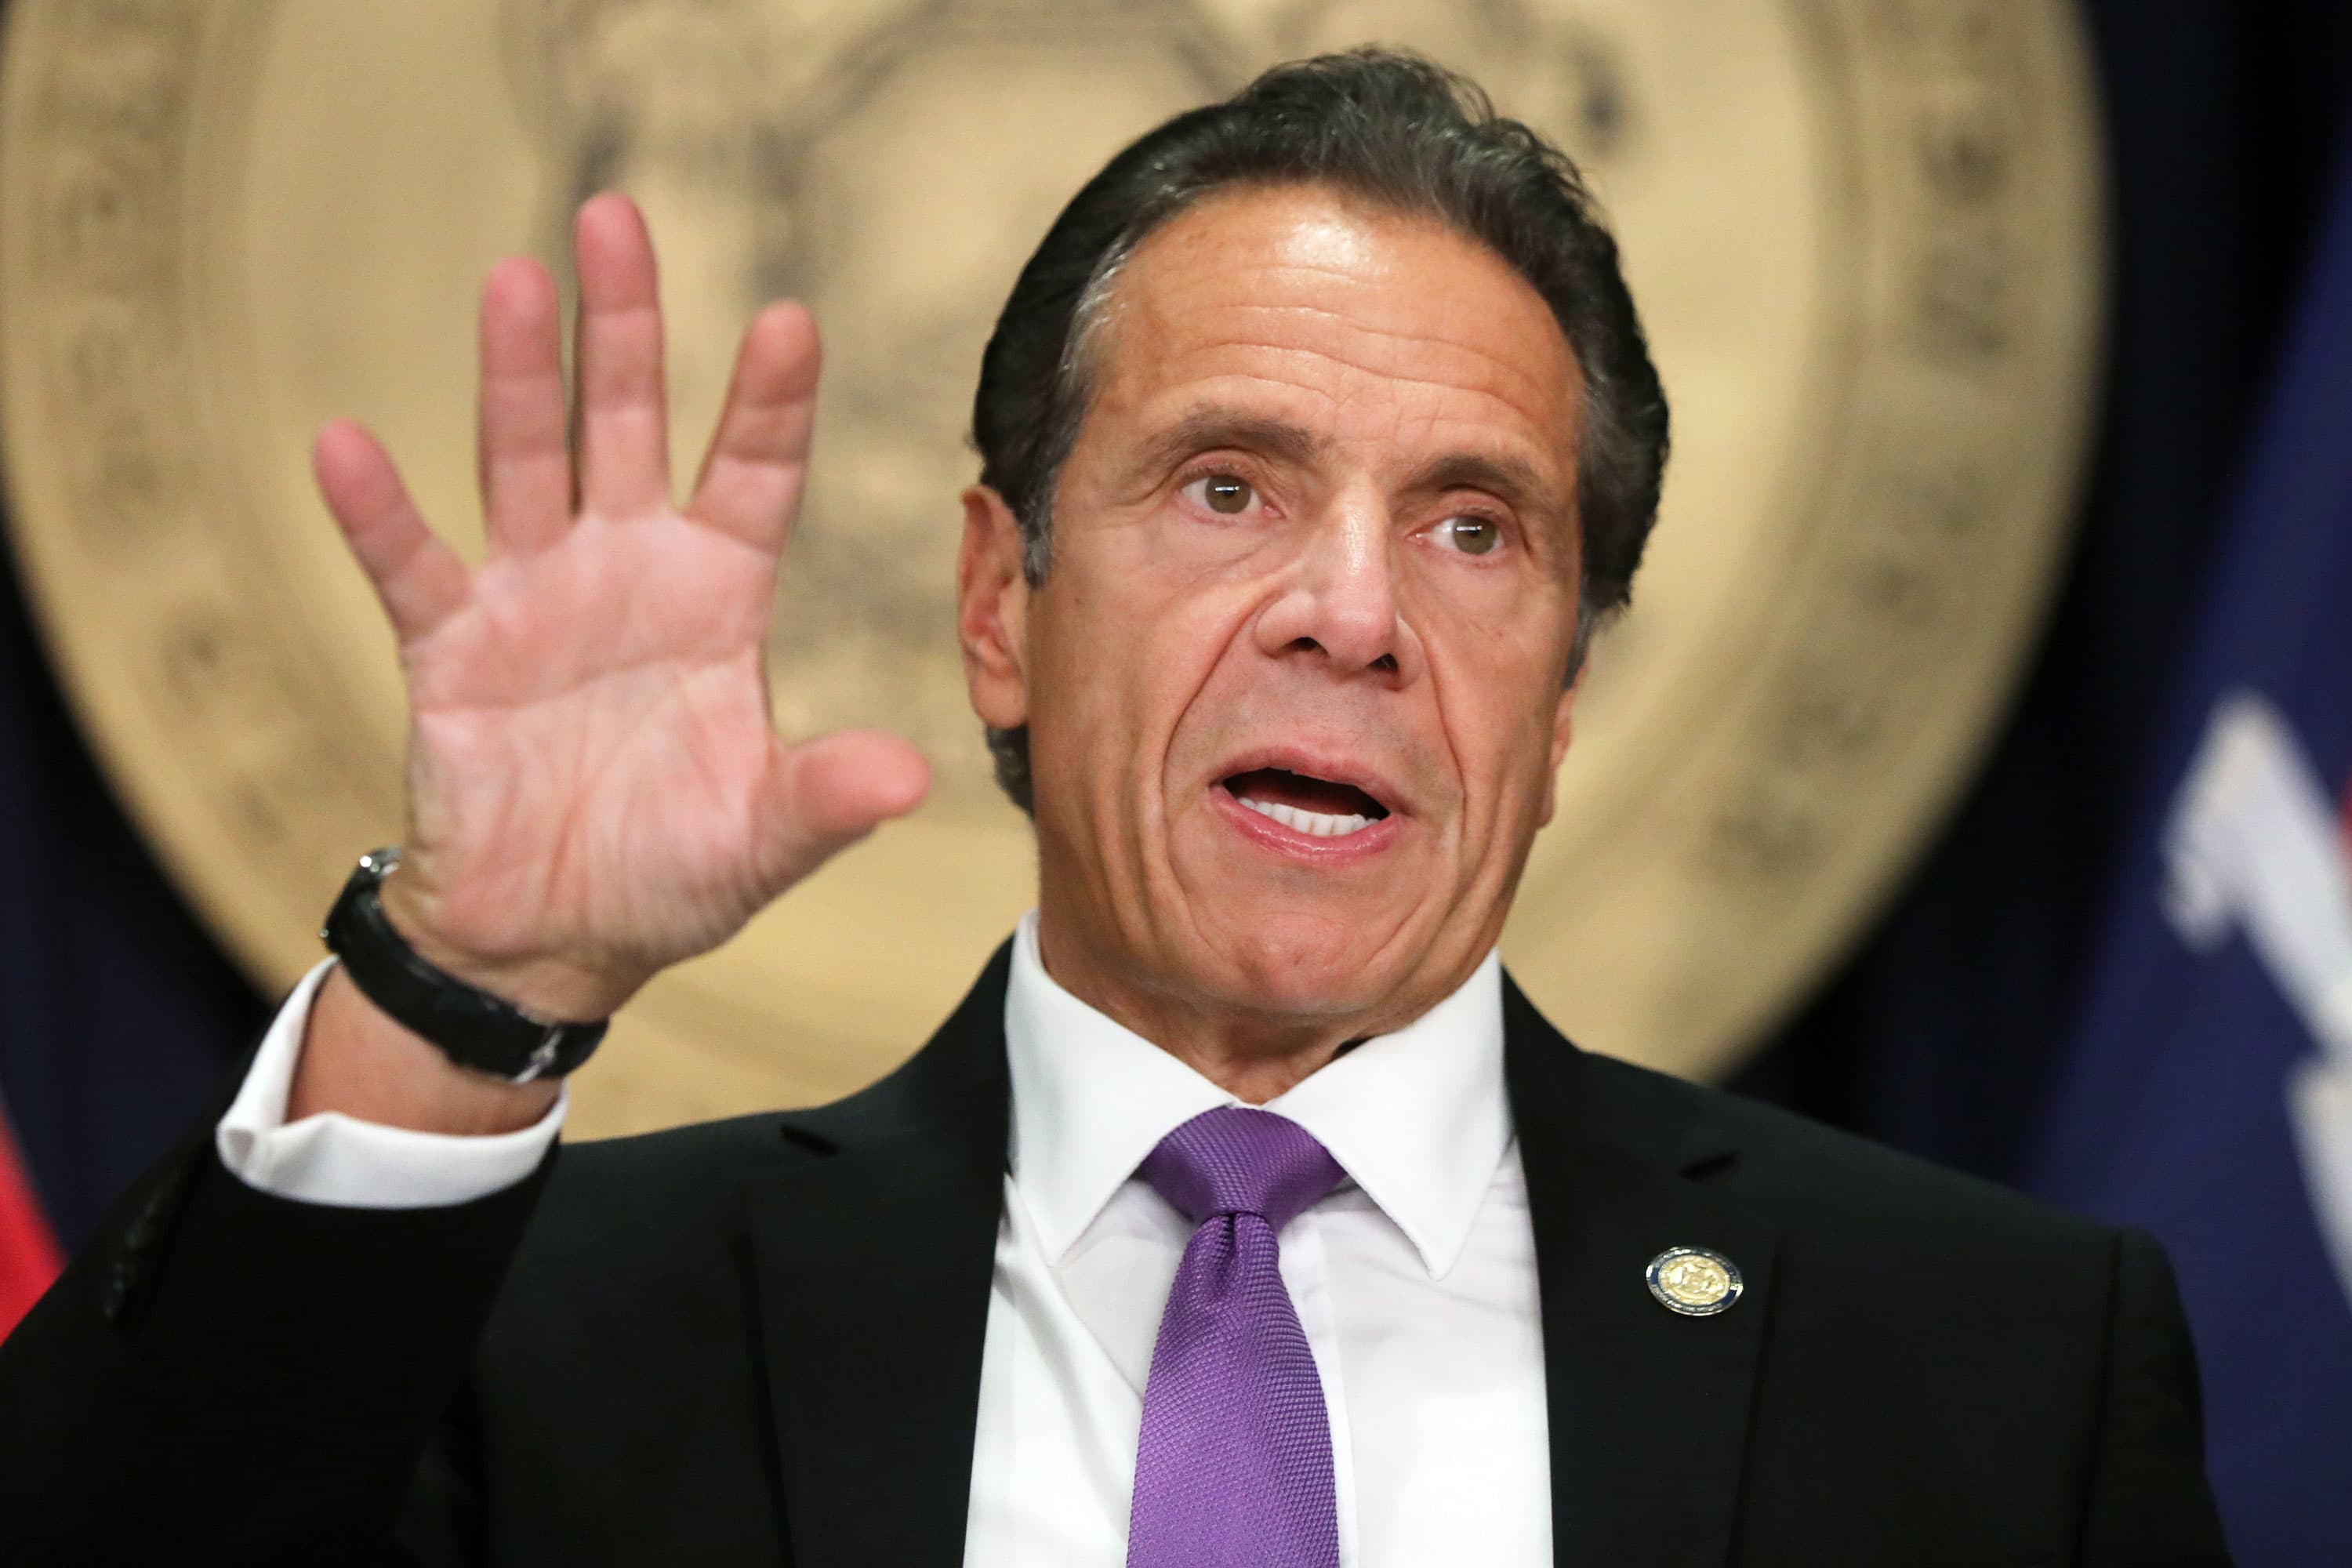 New York investigating possible Covid vaccine fraud, says Cuomo